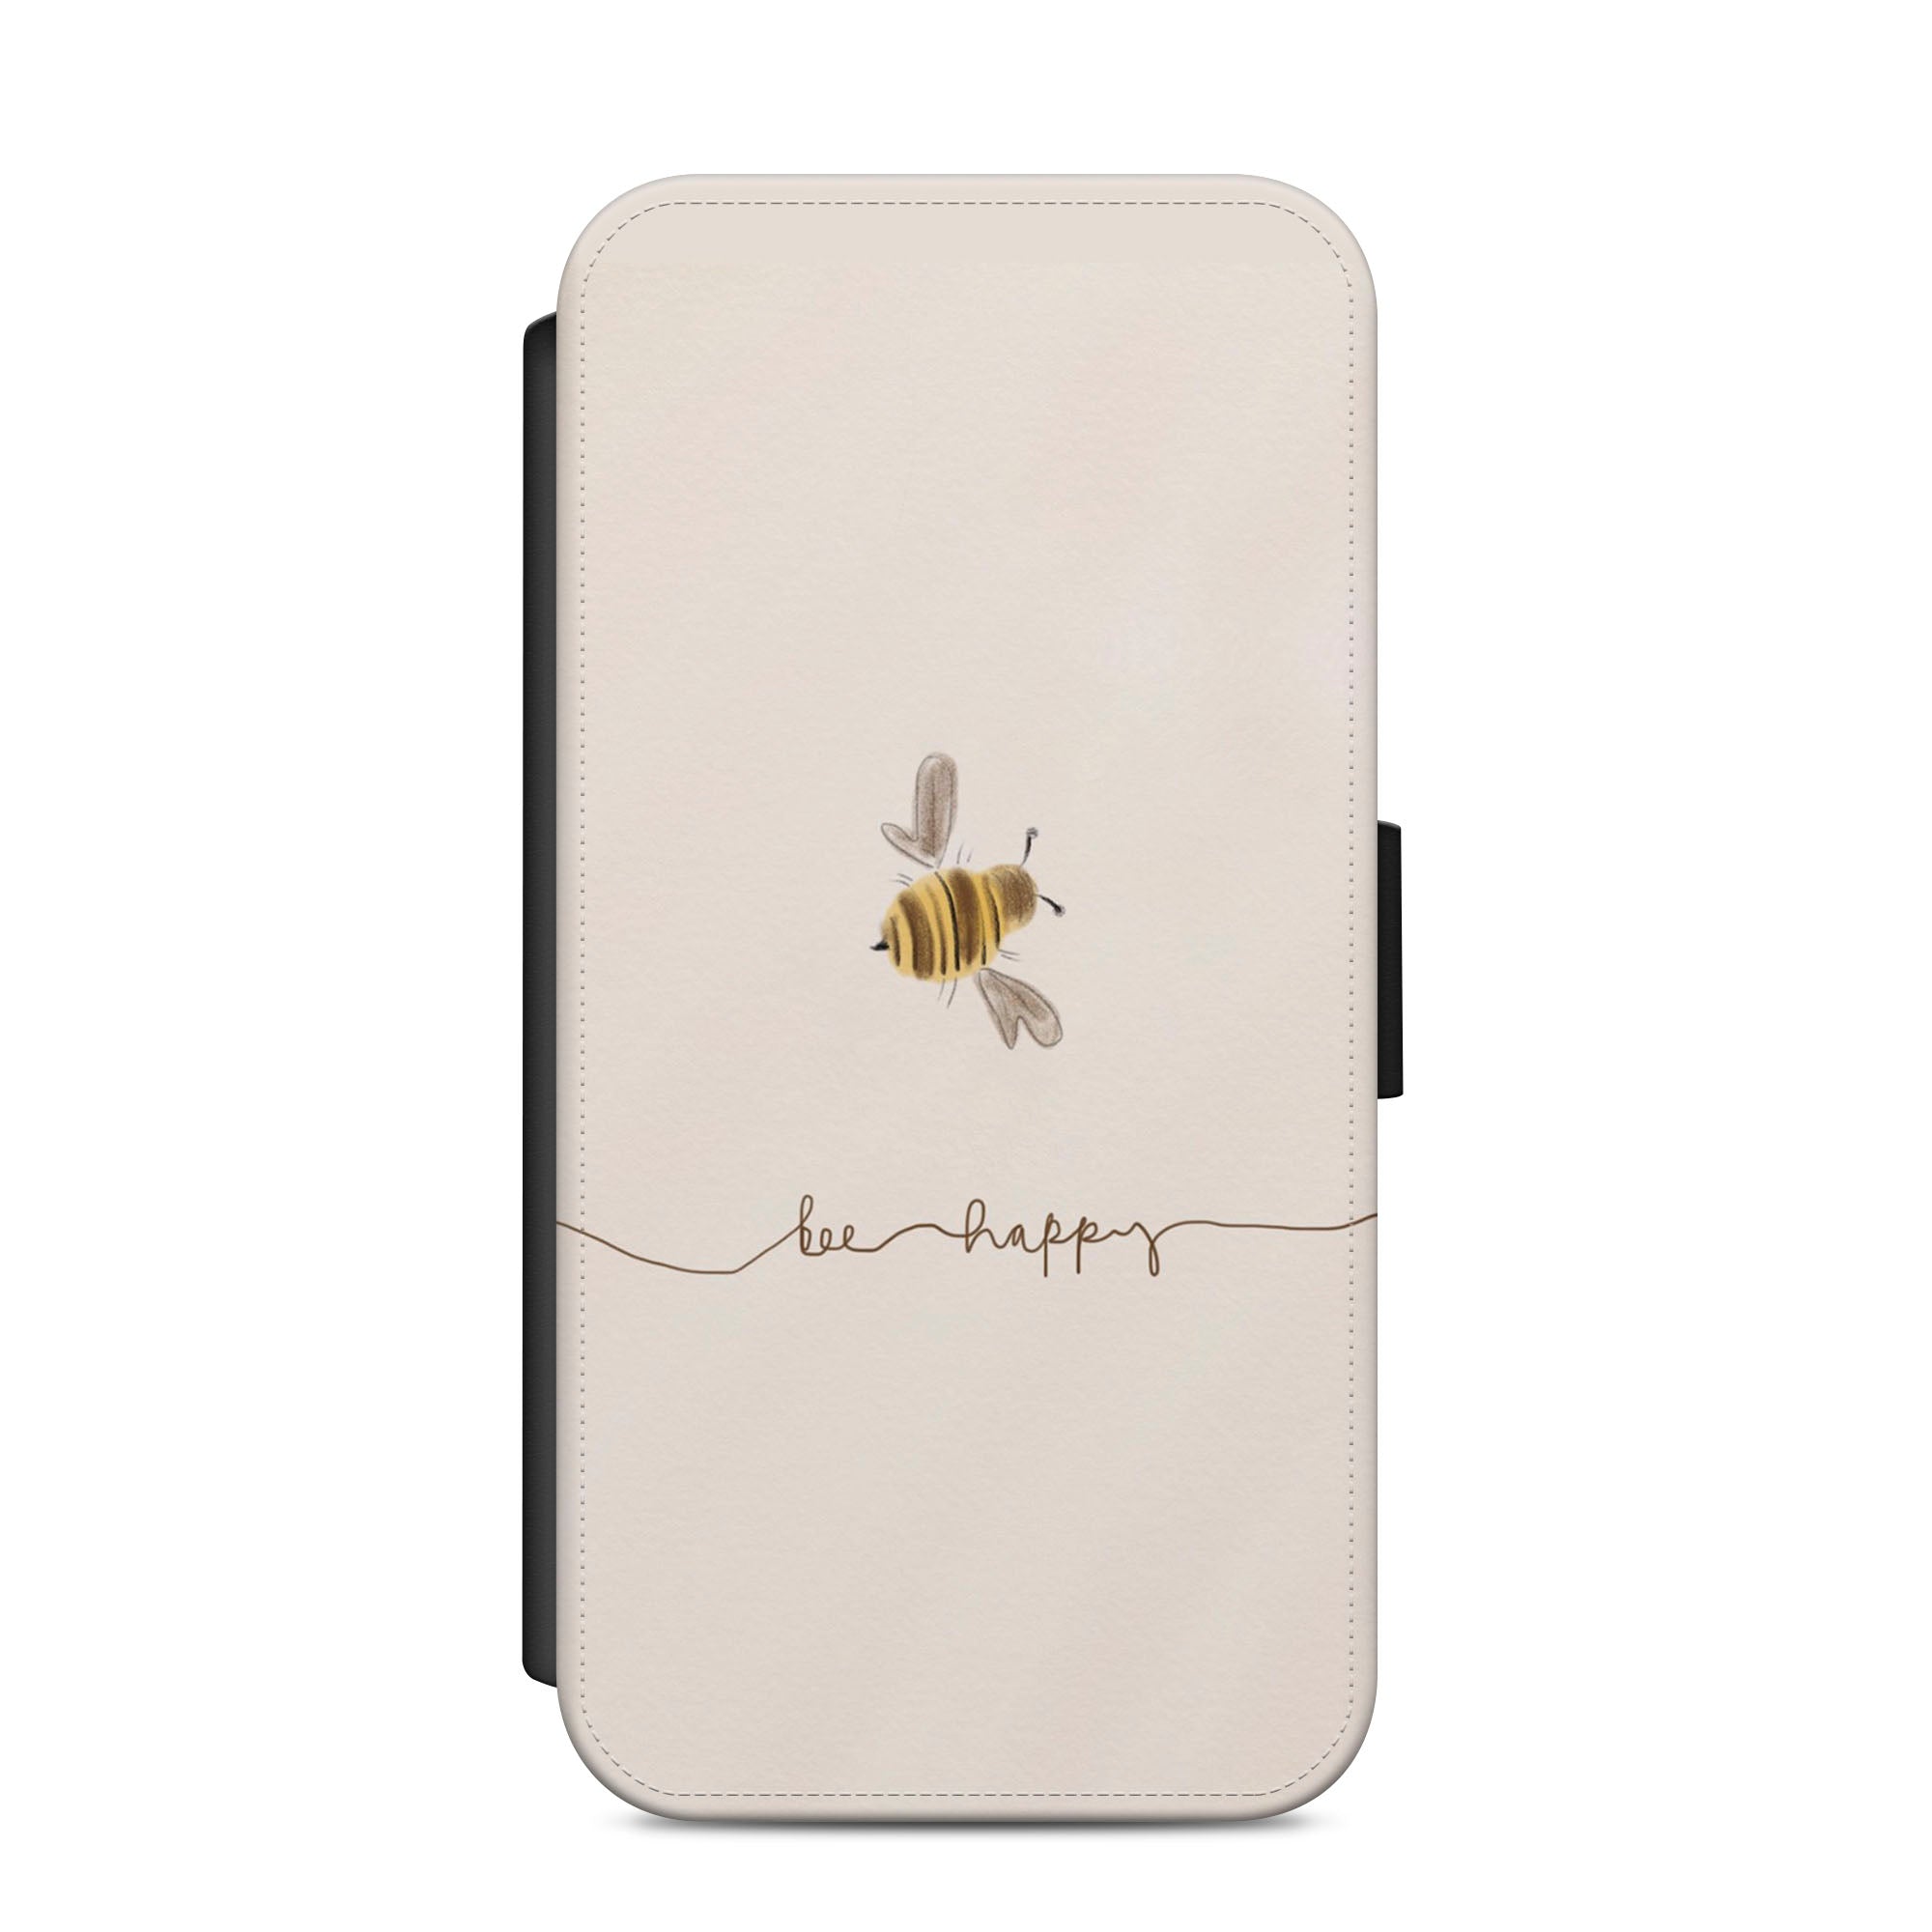 Bee Happy Faux Leather Flip Case Wallet for iPhone / Samsung